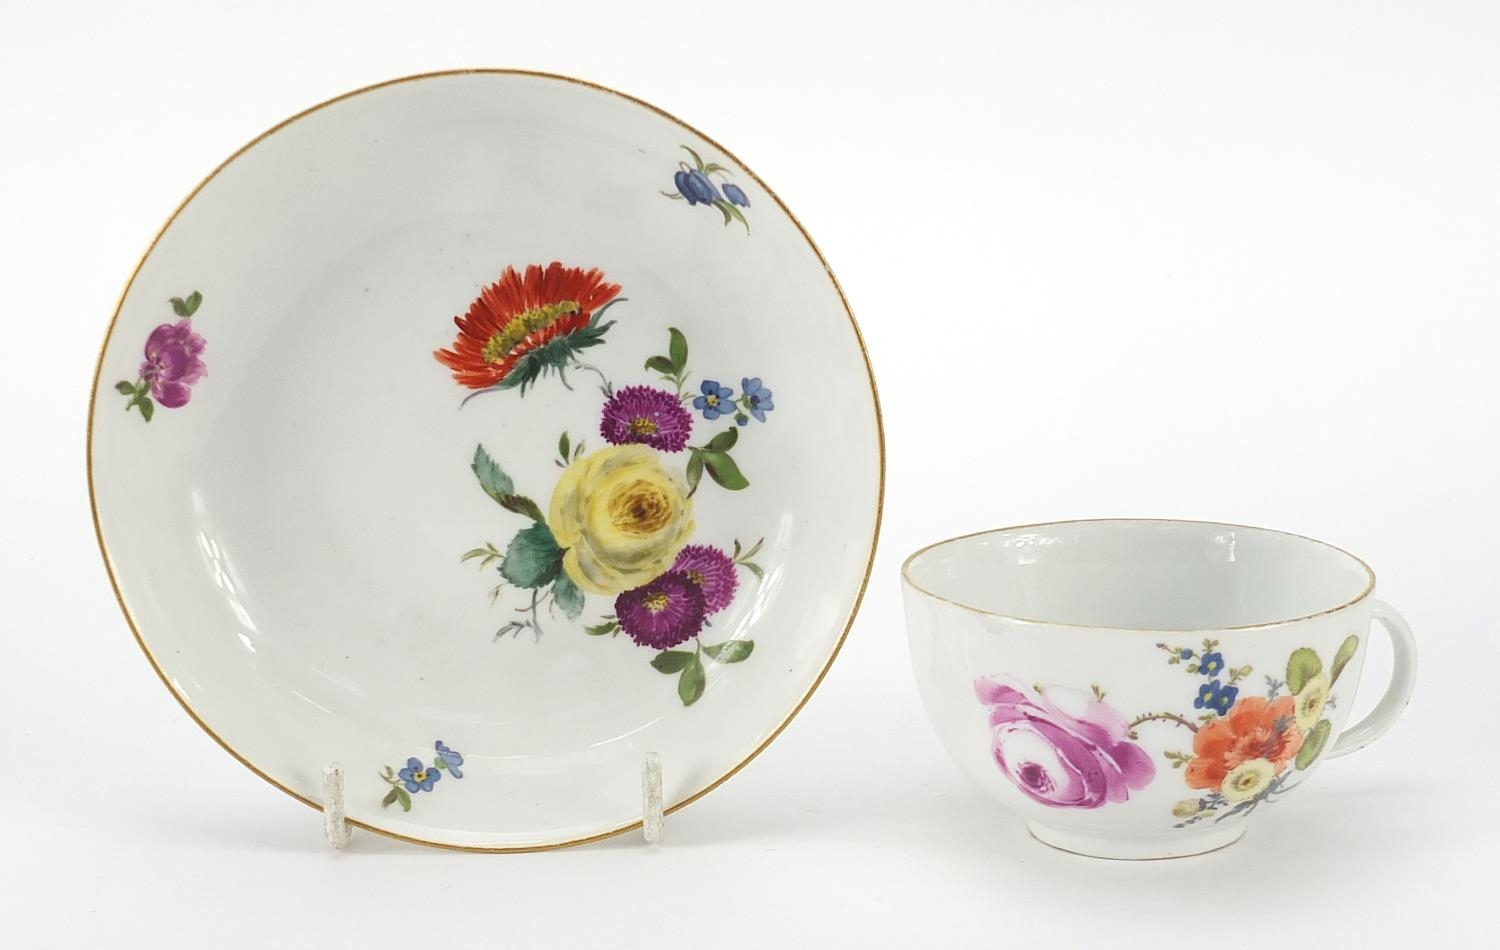 Meissen, 19th century porcelain cup and saucer hand painted with flowers, the saucer 13.5cm in